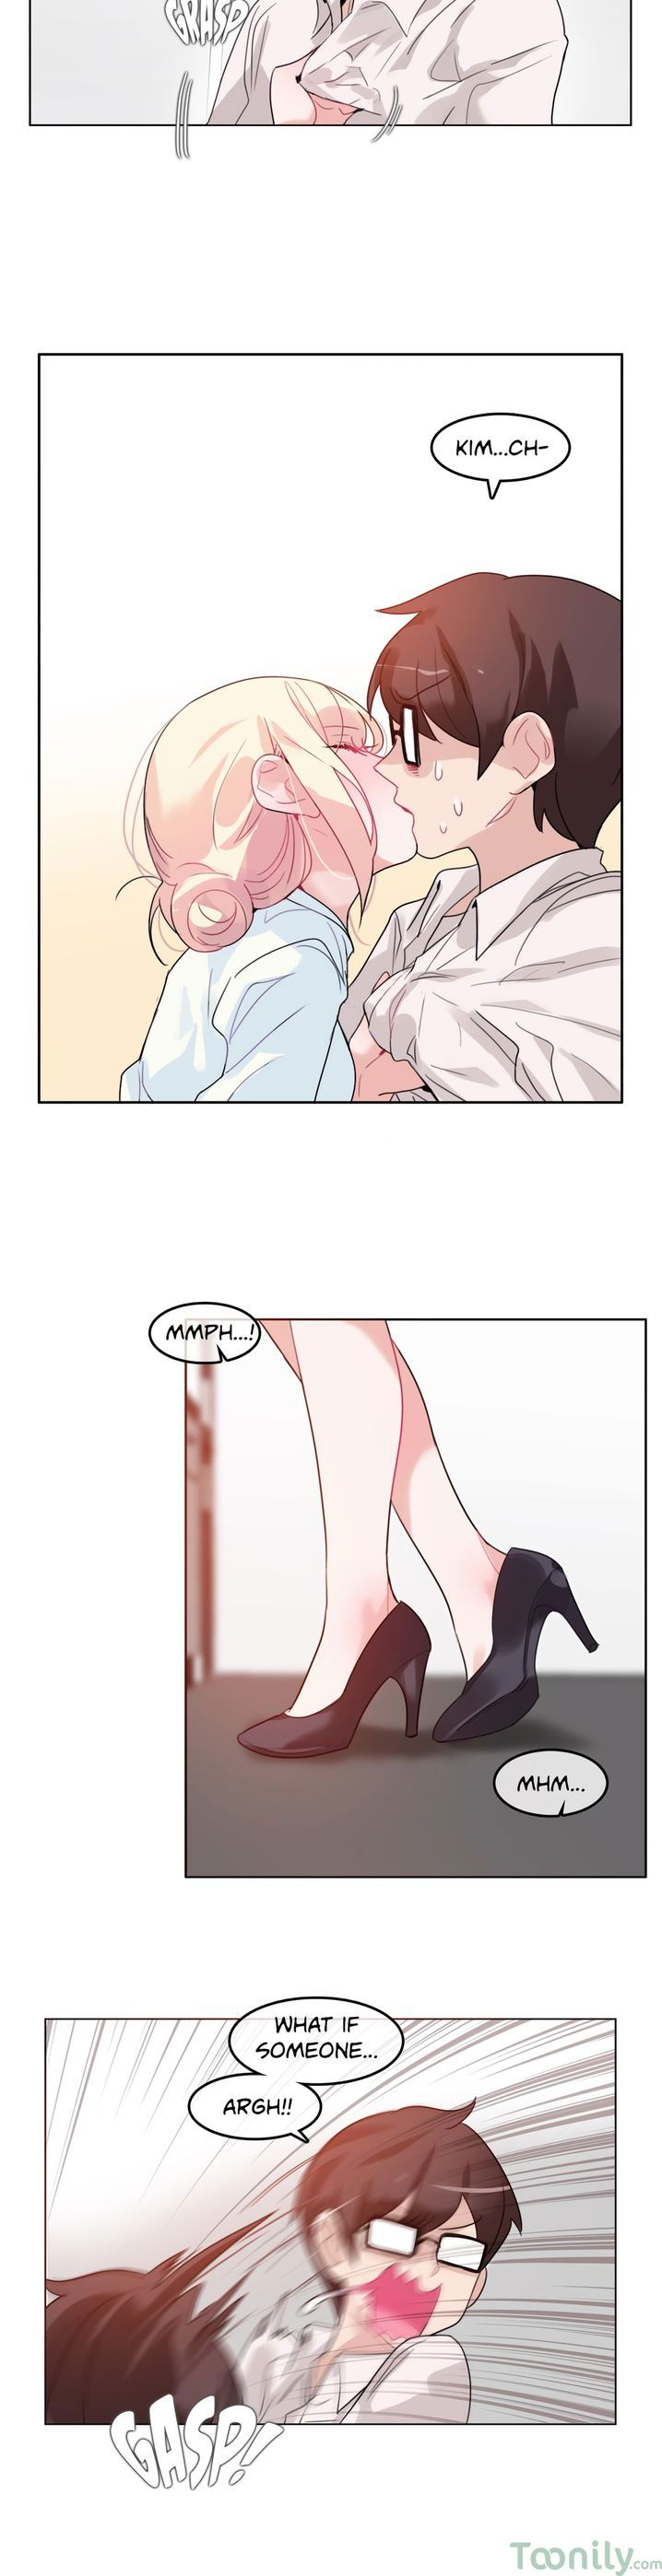 a-perverts-daily-life-chap-32-11